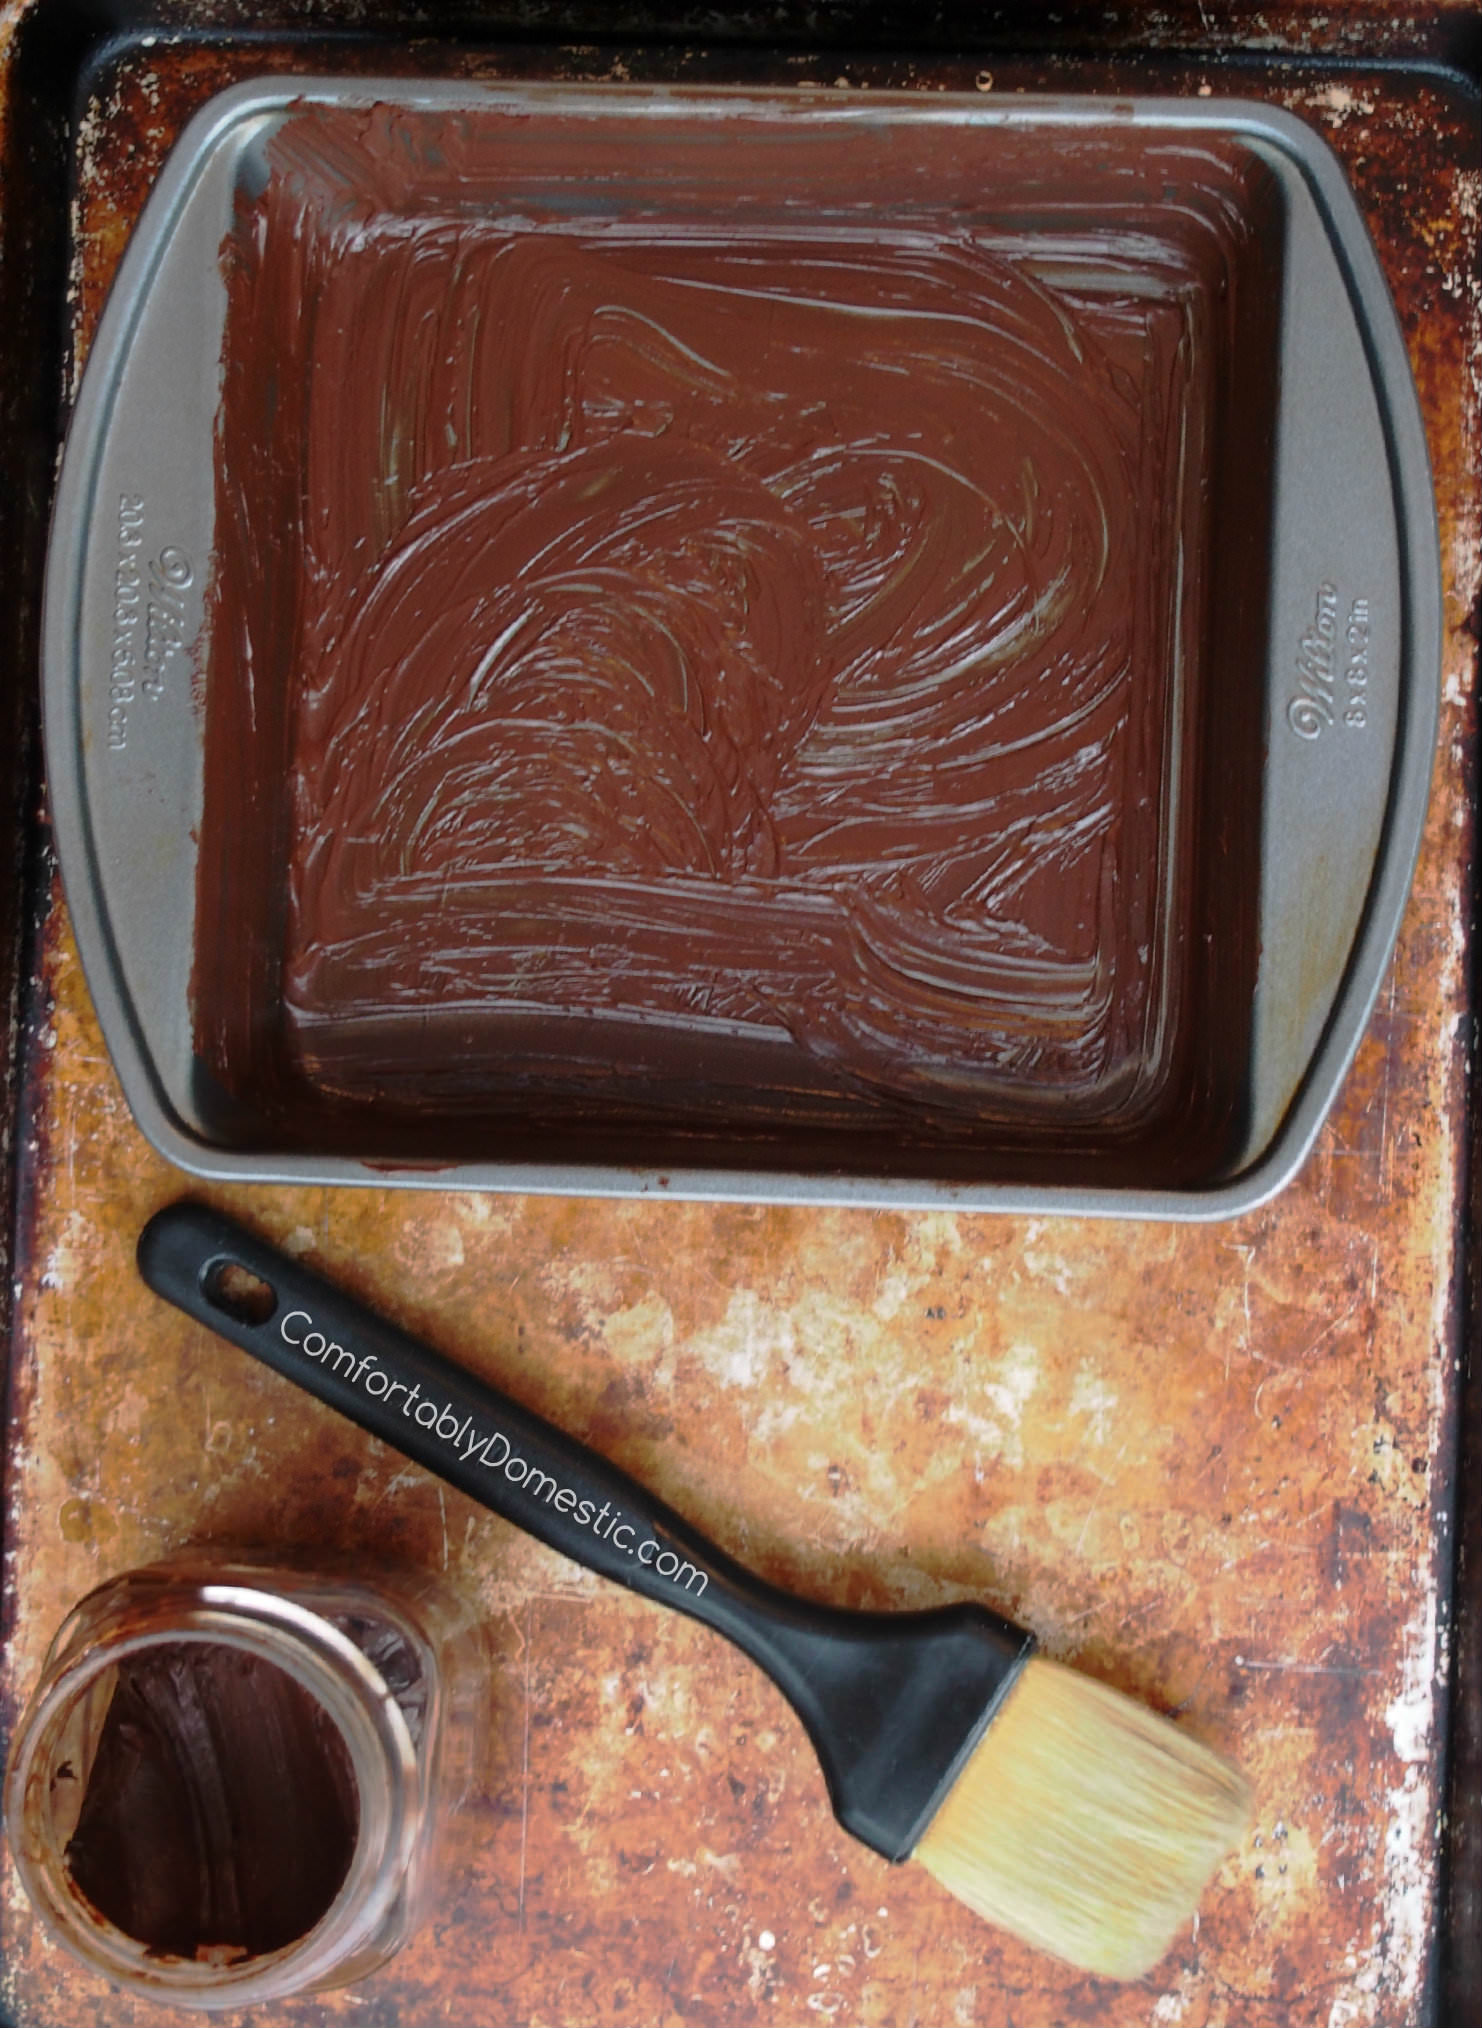 Chocolate Baking Lube is a DIY baking pan release - It inexpensively prepares baking pans to release chocolate baked goods beautifully, keeping them looking every bit chocolate in appearance, with no white residue! | ComfortablyDomestic.com